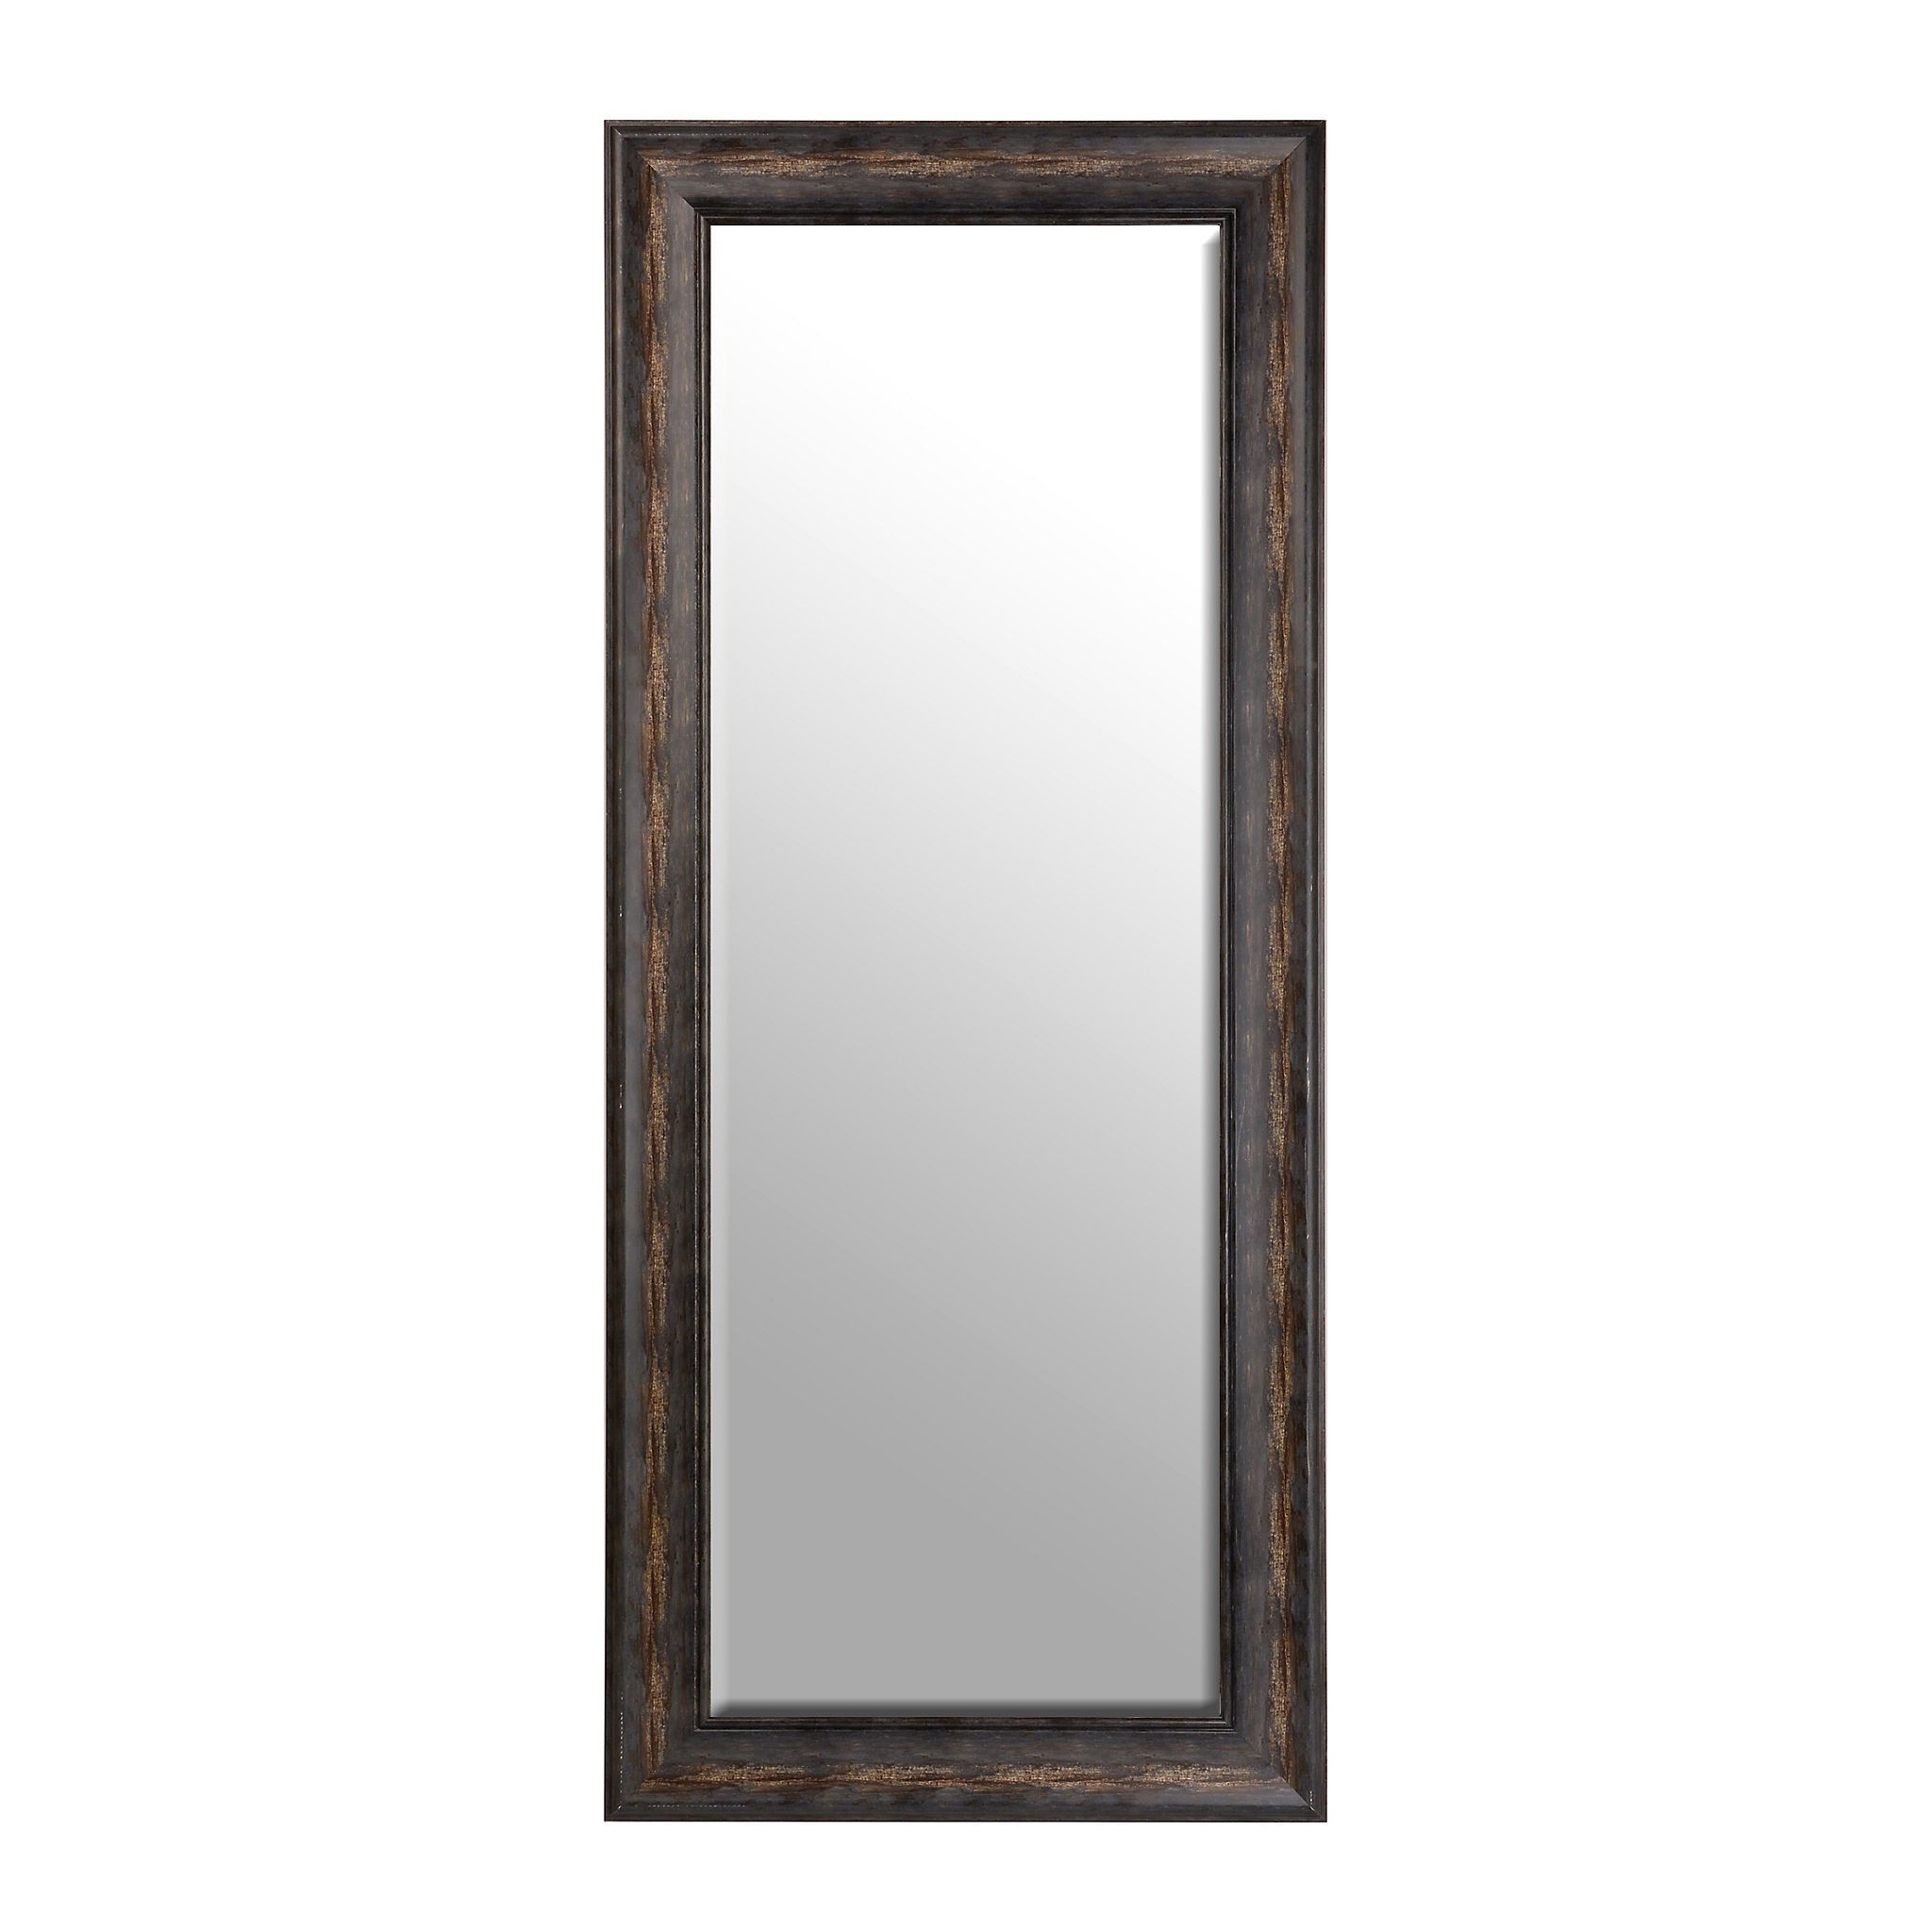 Distressed Black Framed Mirror, 33x79 In | How To Clean Mirrors Inside Distressed Dark Bronze Wall Mirrors (View 10 of 15)